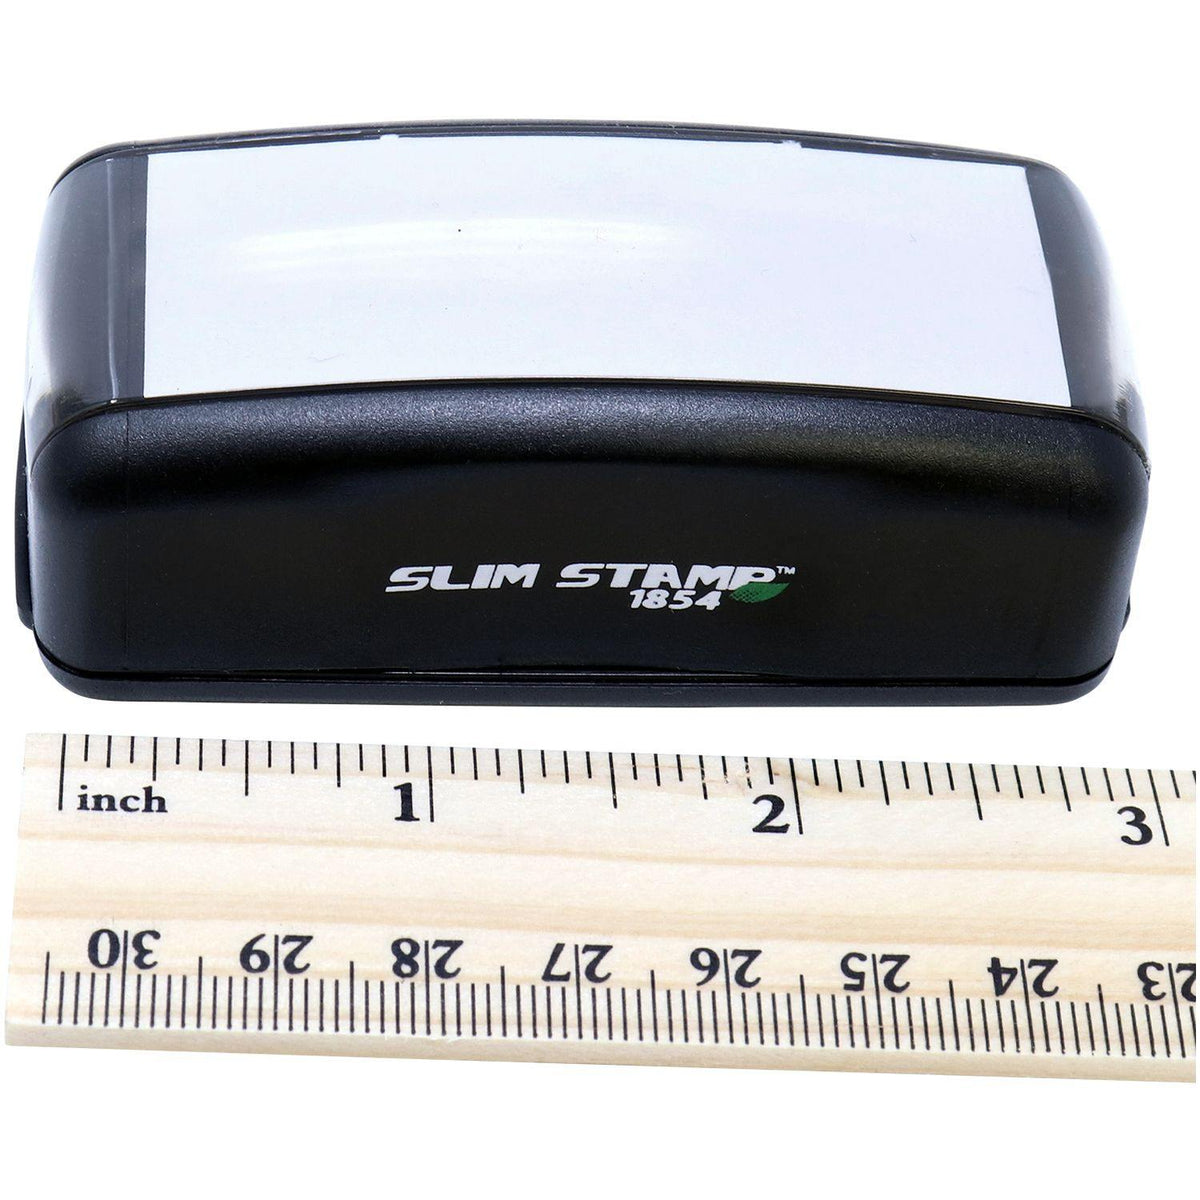 Measurement Large Pre Inked Rh Negative Stamp with Ruler